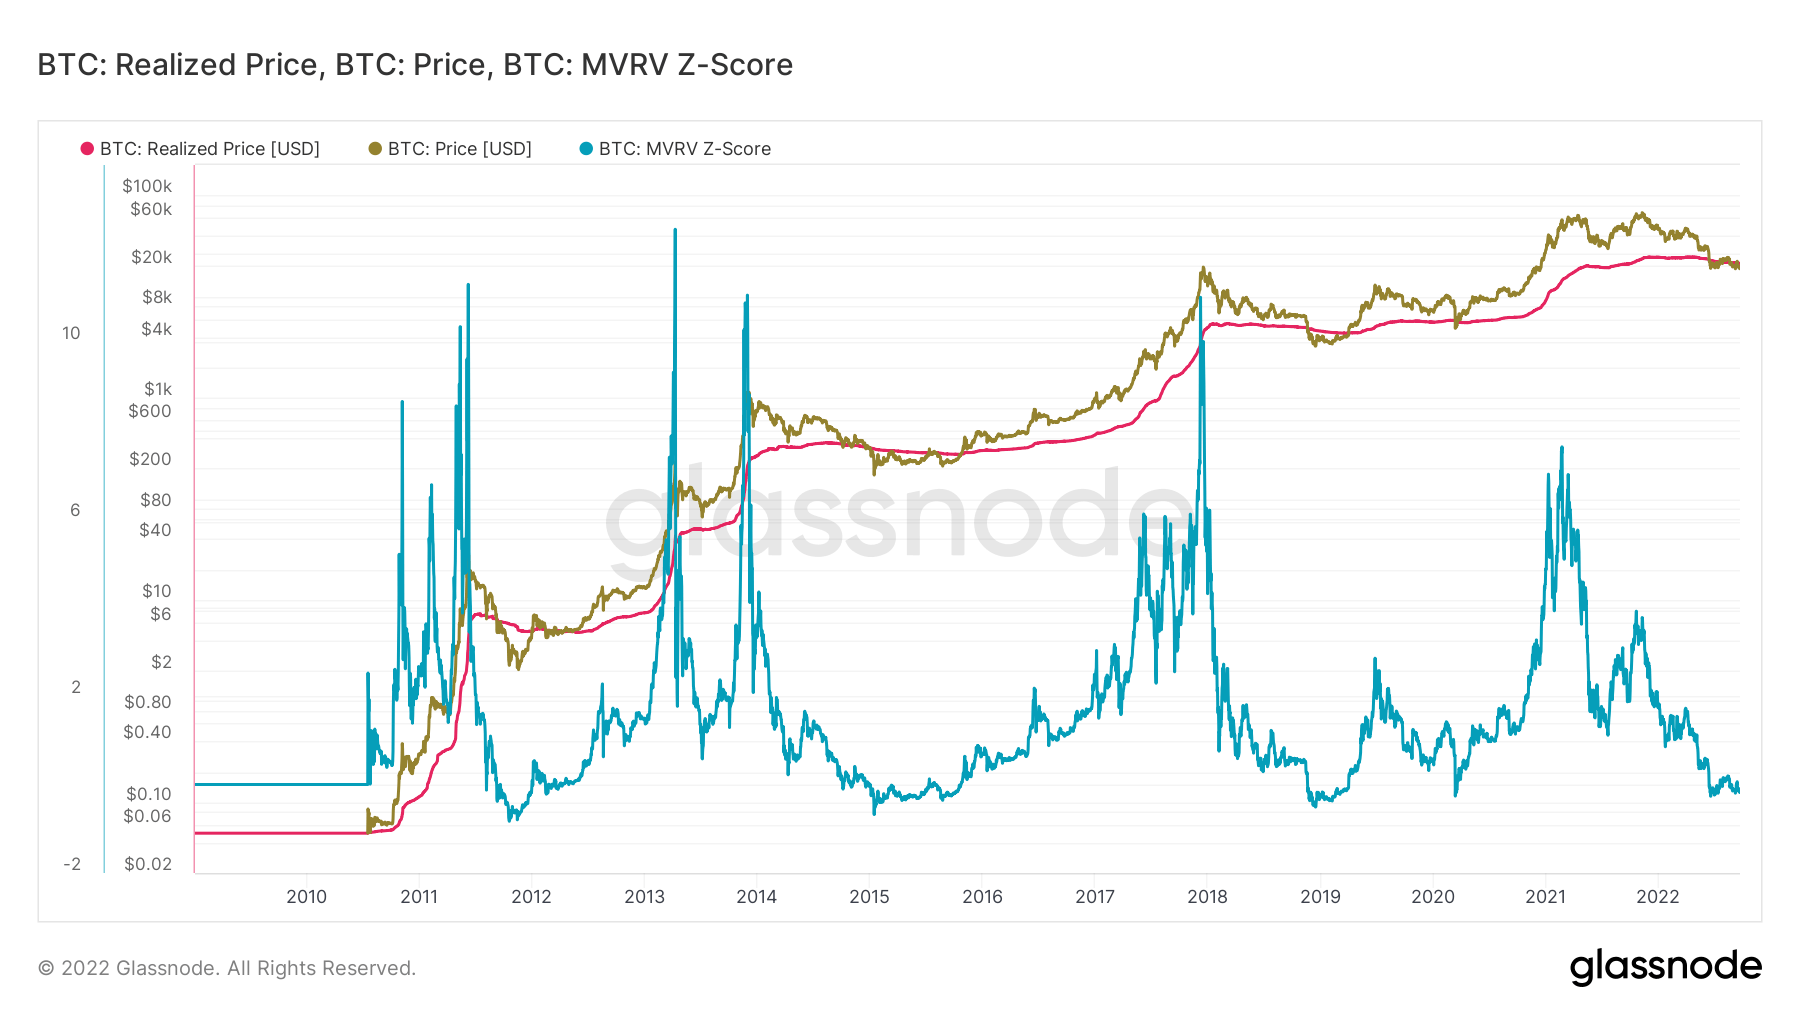 Research: How low can Bitcoin price go?